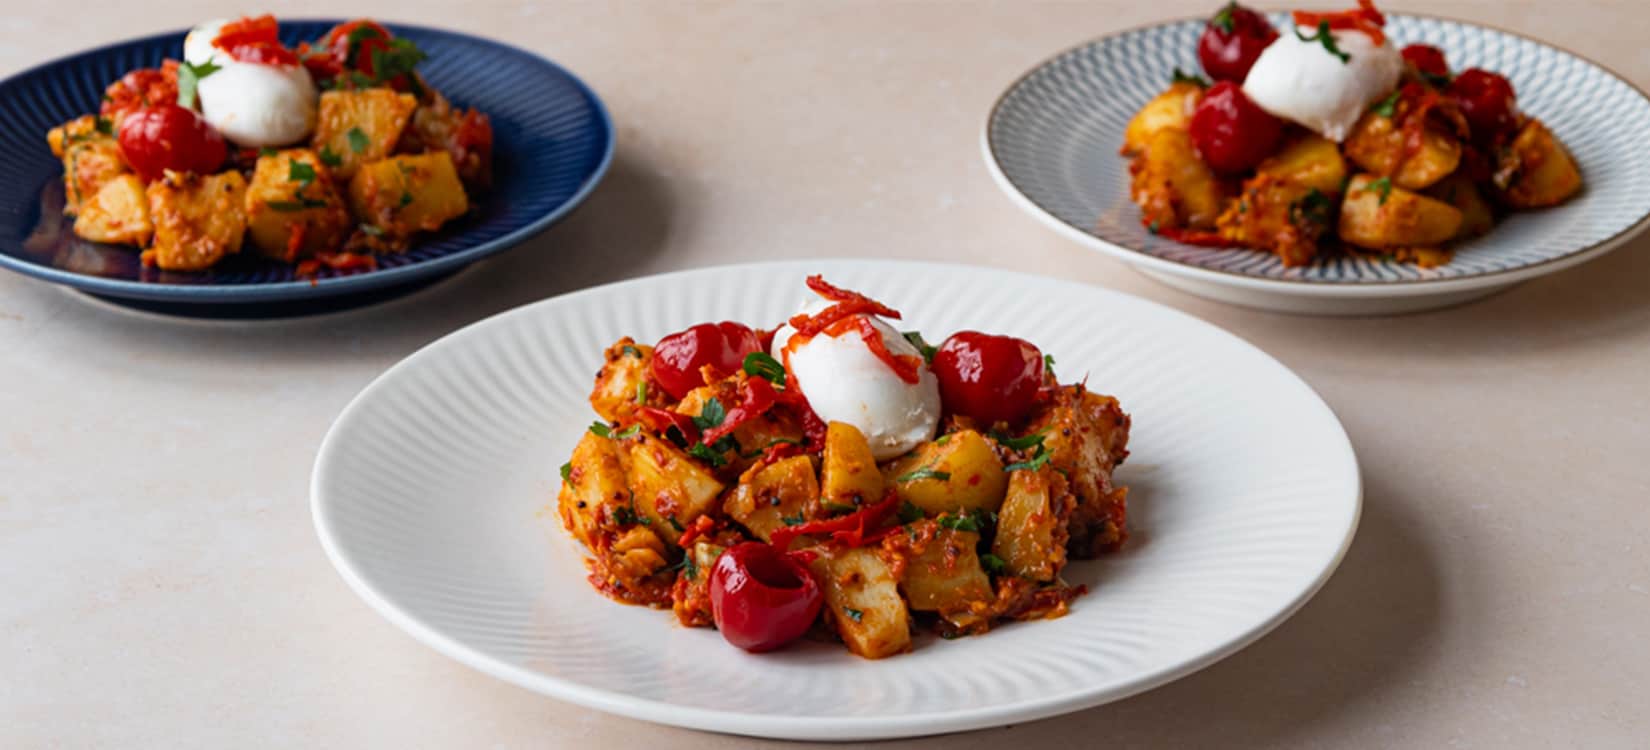 Bombay Potatoes With Poached Eggs and Red Piquanté Peppers